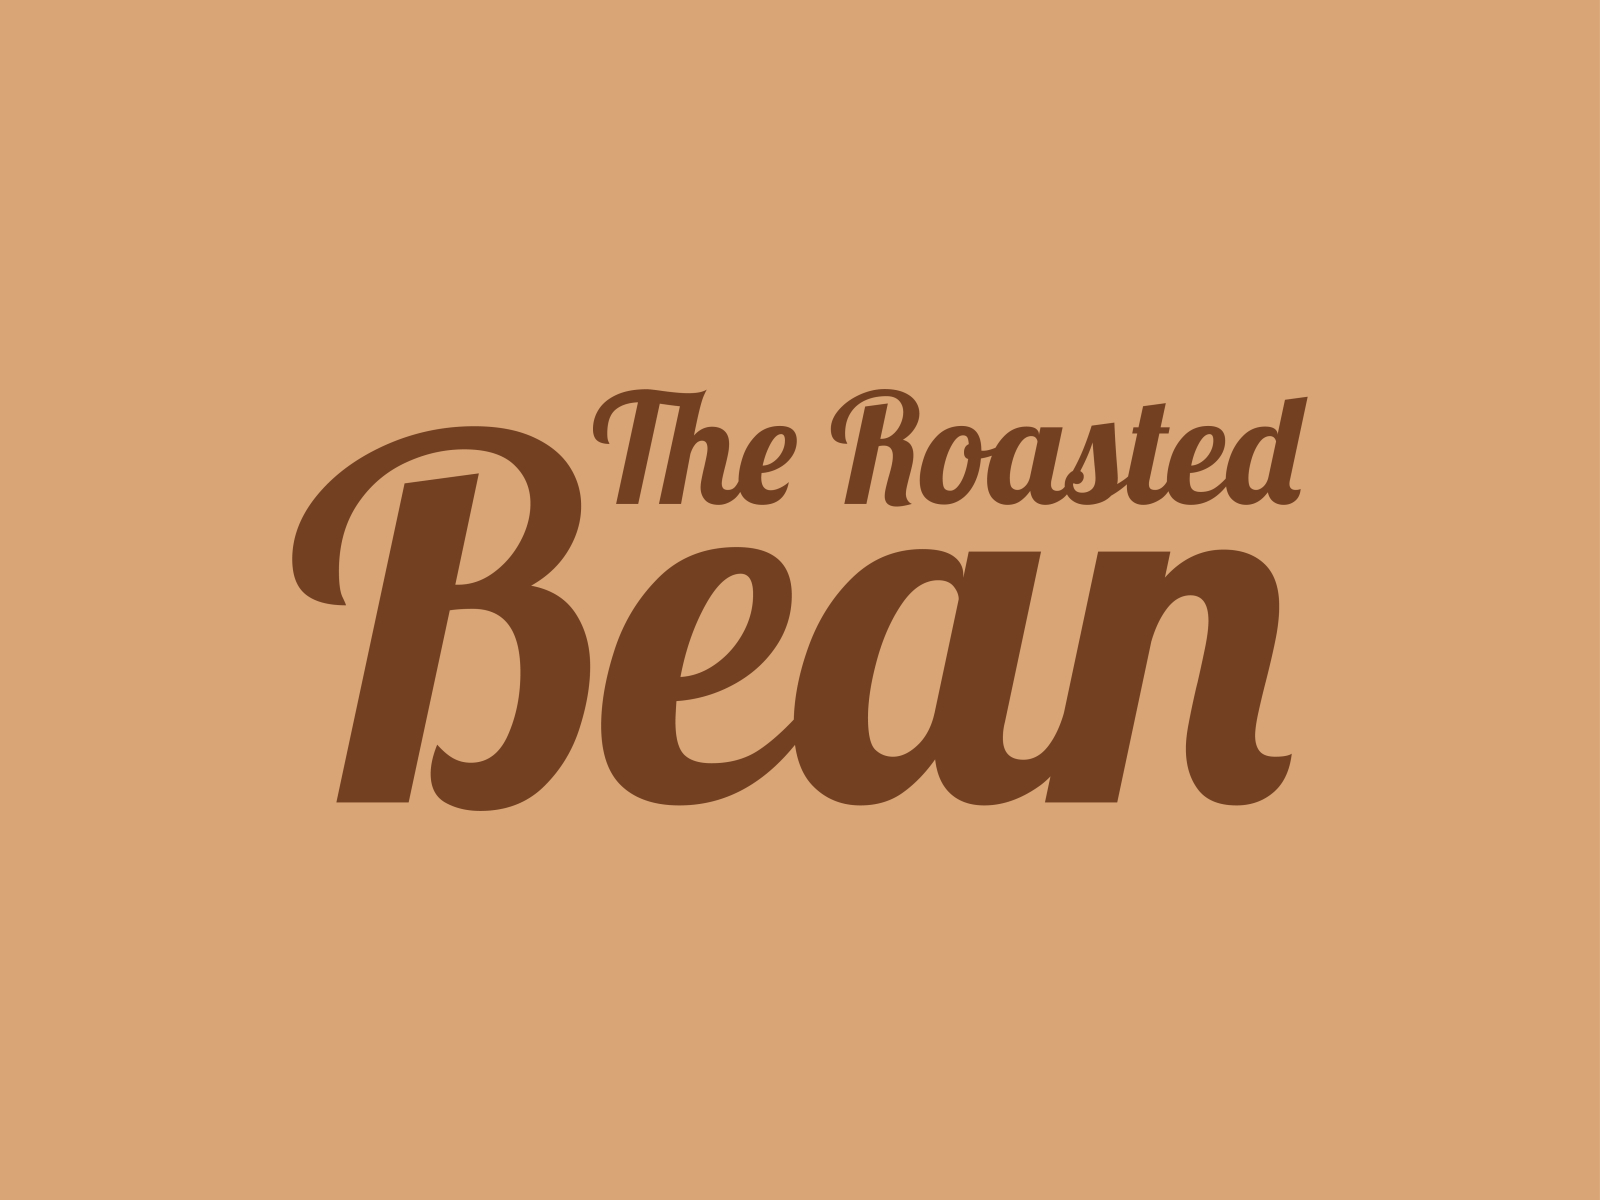 The Roasted Bean Logo by 𝗝𝗮𝗵𝘃𝘆• 𝗚𝗿𝗮𝗽𝗵𝗶𝗰 𝗗𝗲𝘀𝗶𝗴𝗻𝗲𝗿 on Dribbble